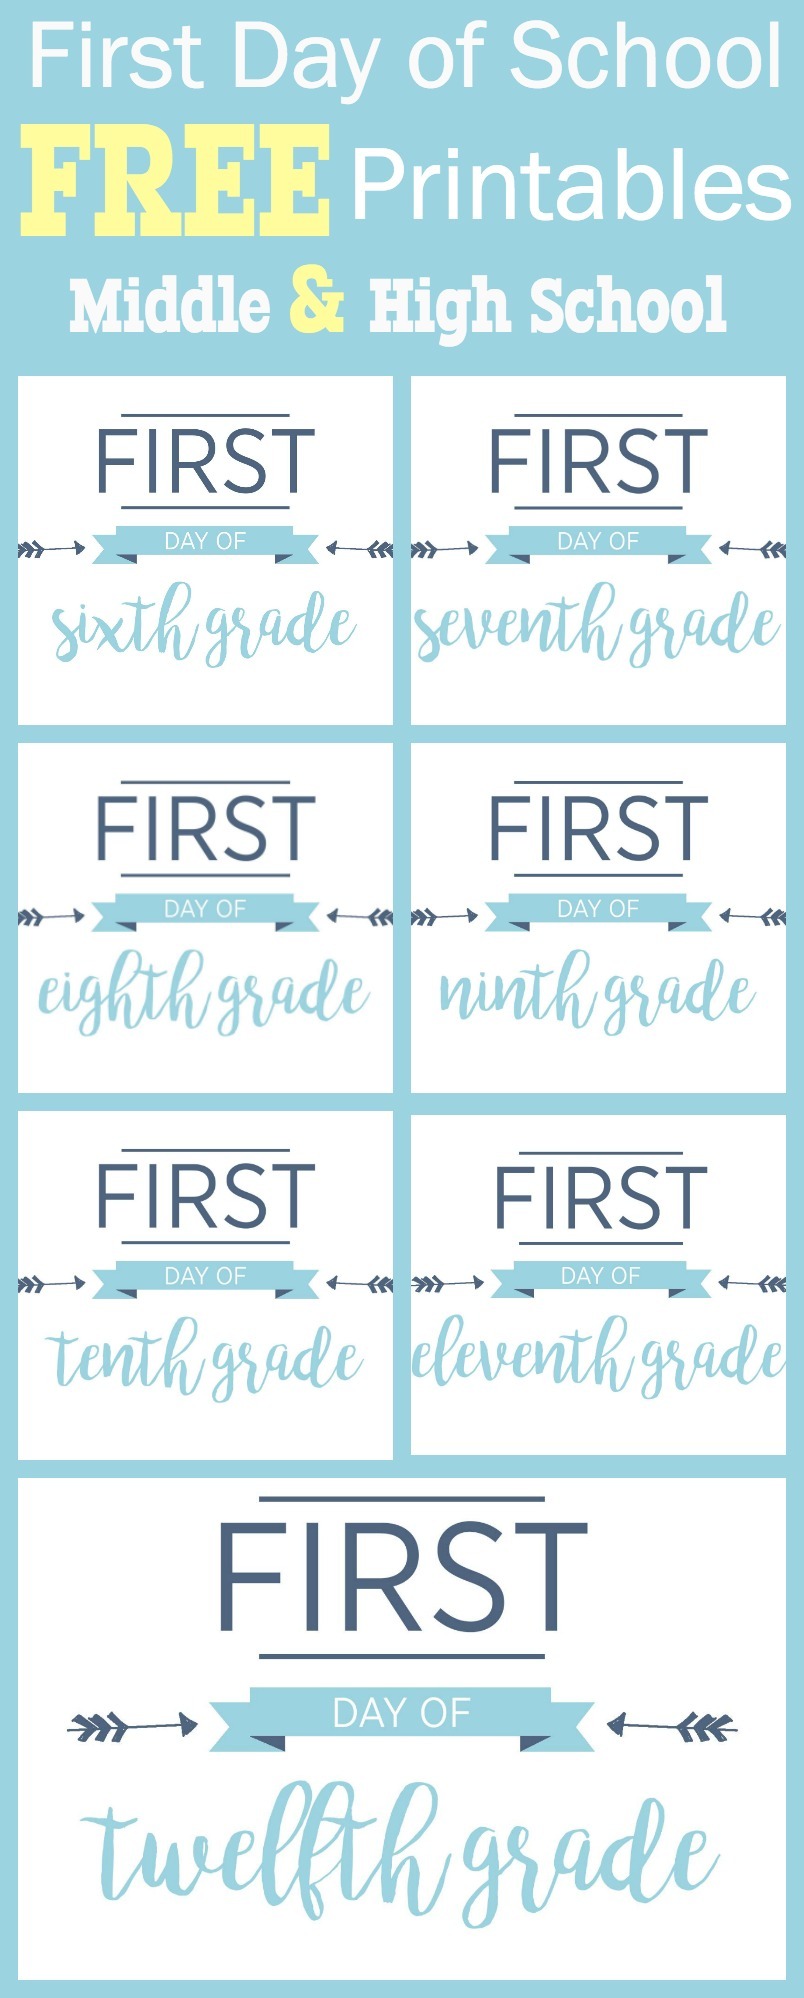 Don't forget the older kids when it comes to those first day of school photos. We've updated these signs to make them a little more sophisticated for your tweens and teens. First Day of School Printables. 